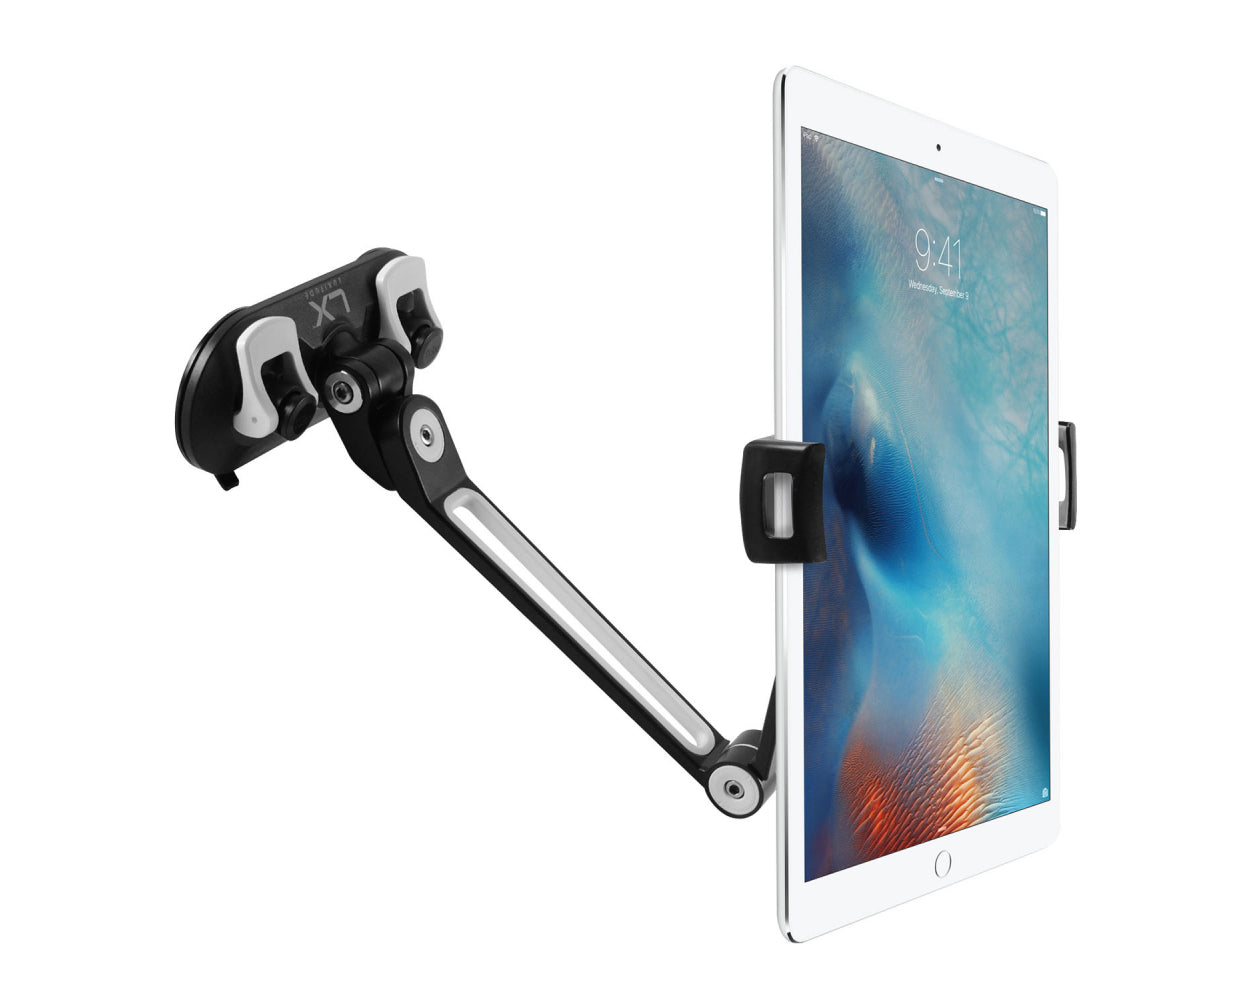 Luxitude Tablet & Phone Holder/ Stand, Perfect for Smart Phones, E-Readers, Nintendo Switch & Tablets, with suction cup base